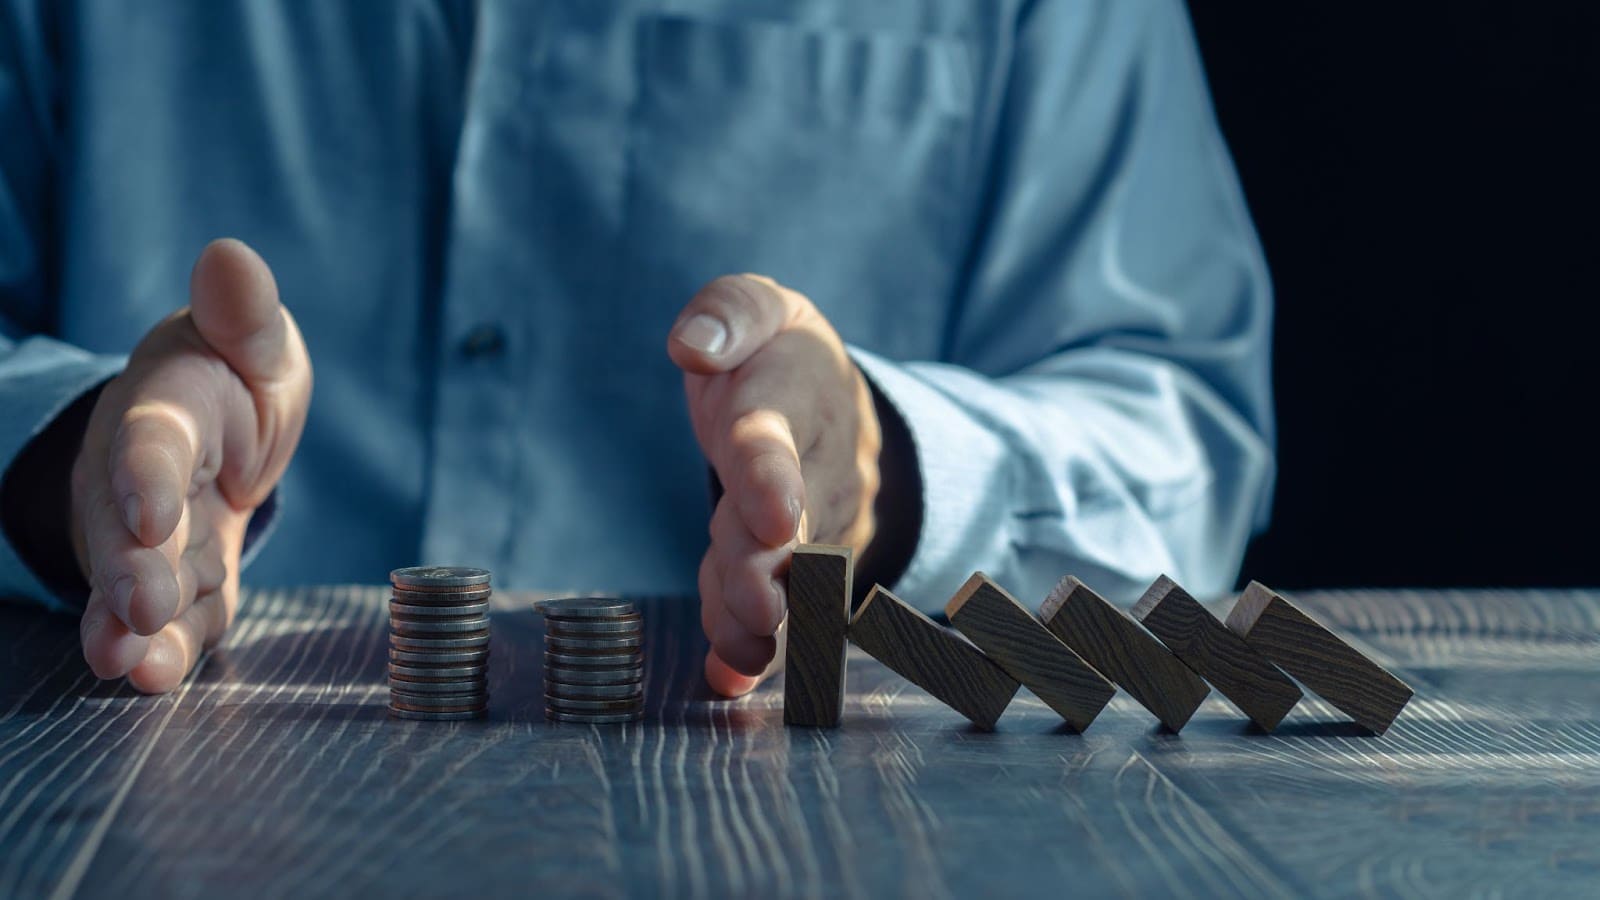 Hands preventing domino crisis effect symbolizing asset protection and financial stability.